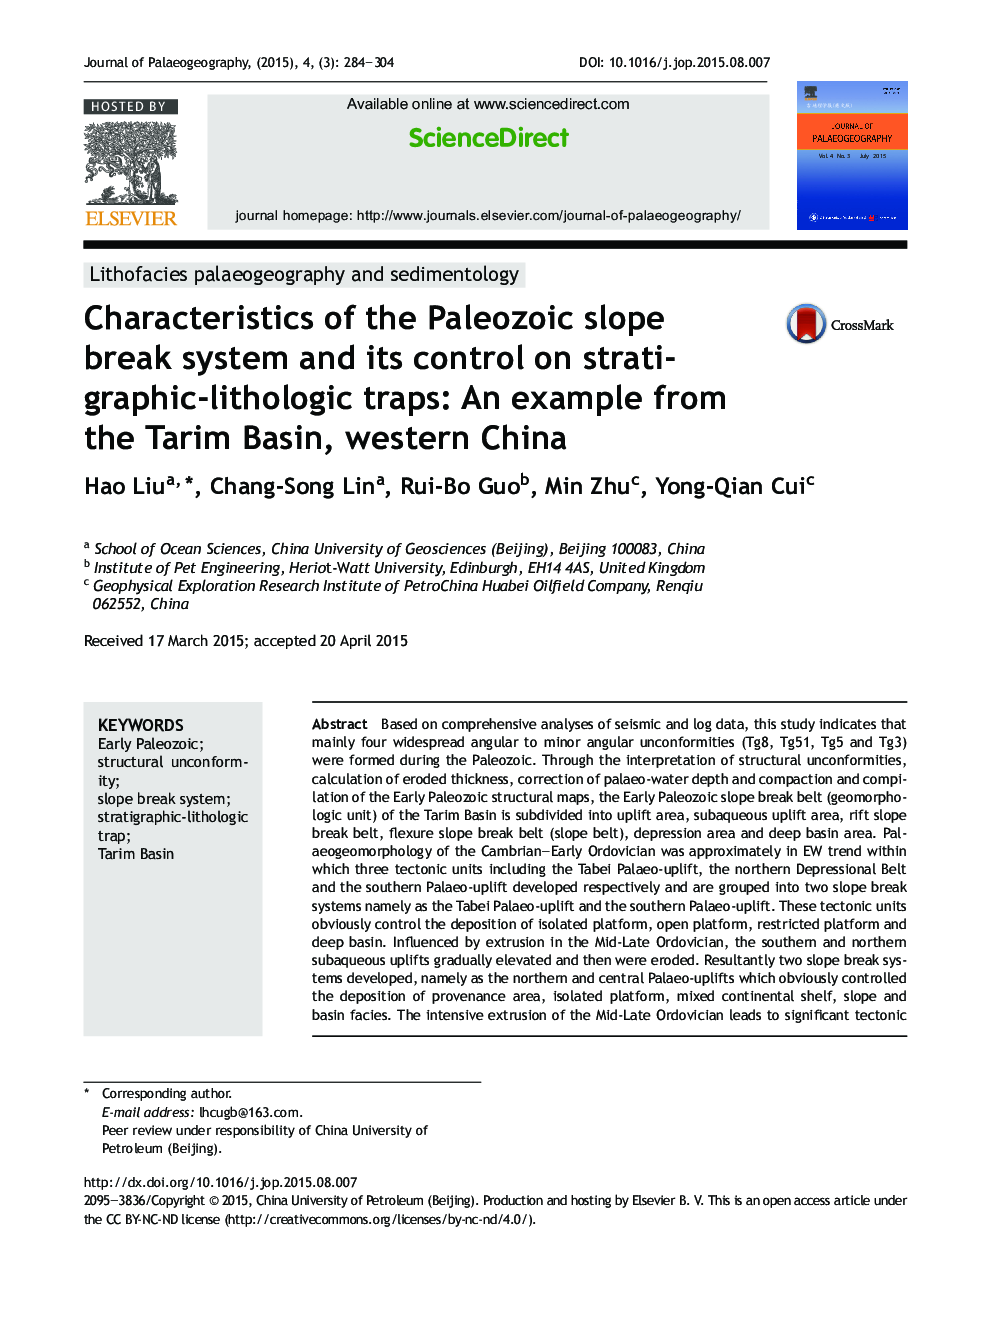 Characteristics of the Paleozoic slope break system and its control on stratigraphic-lithologic traps: An example from the Tarim Basin, western China 